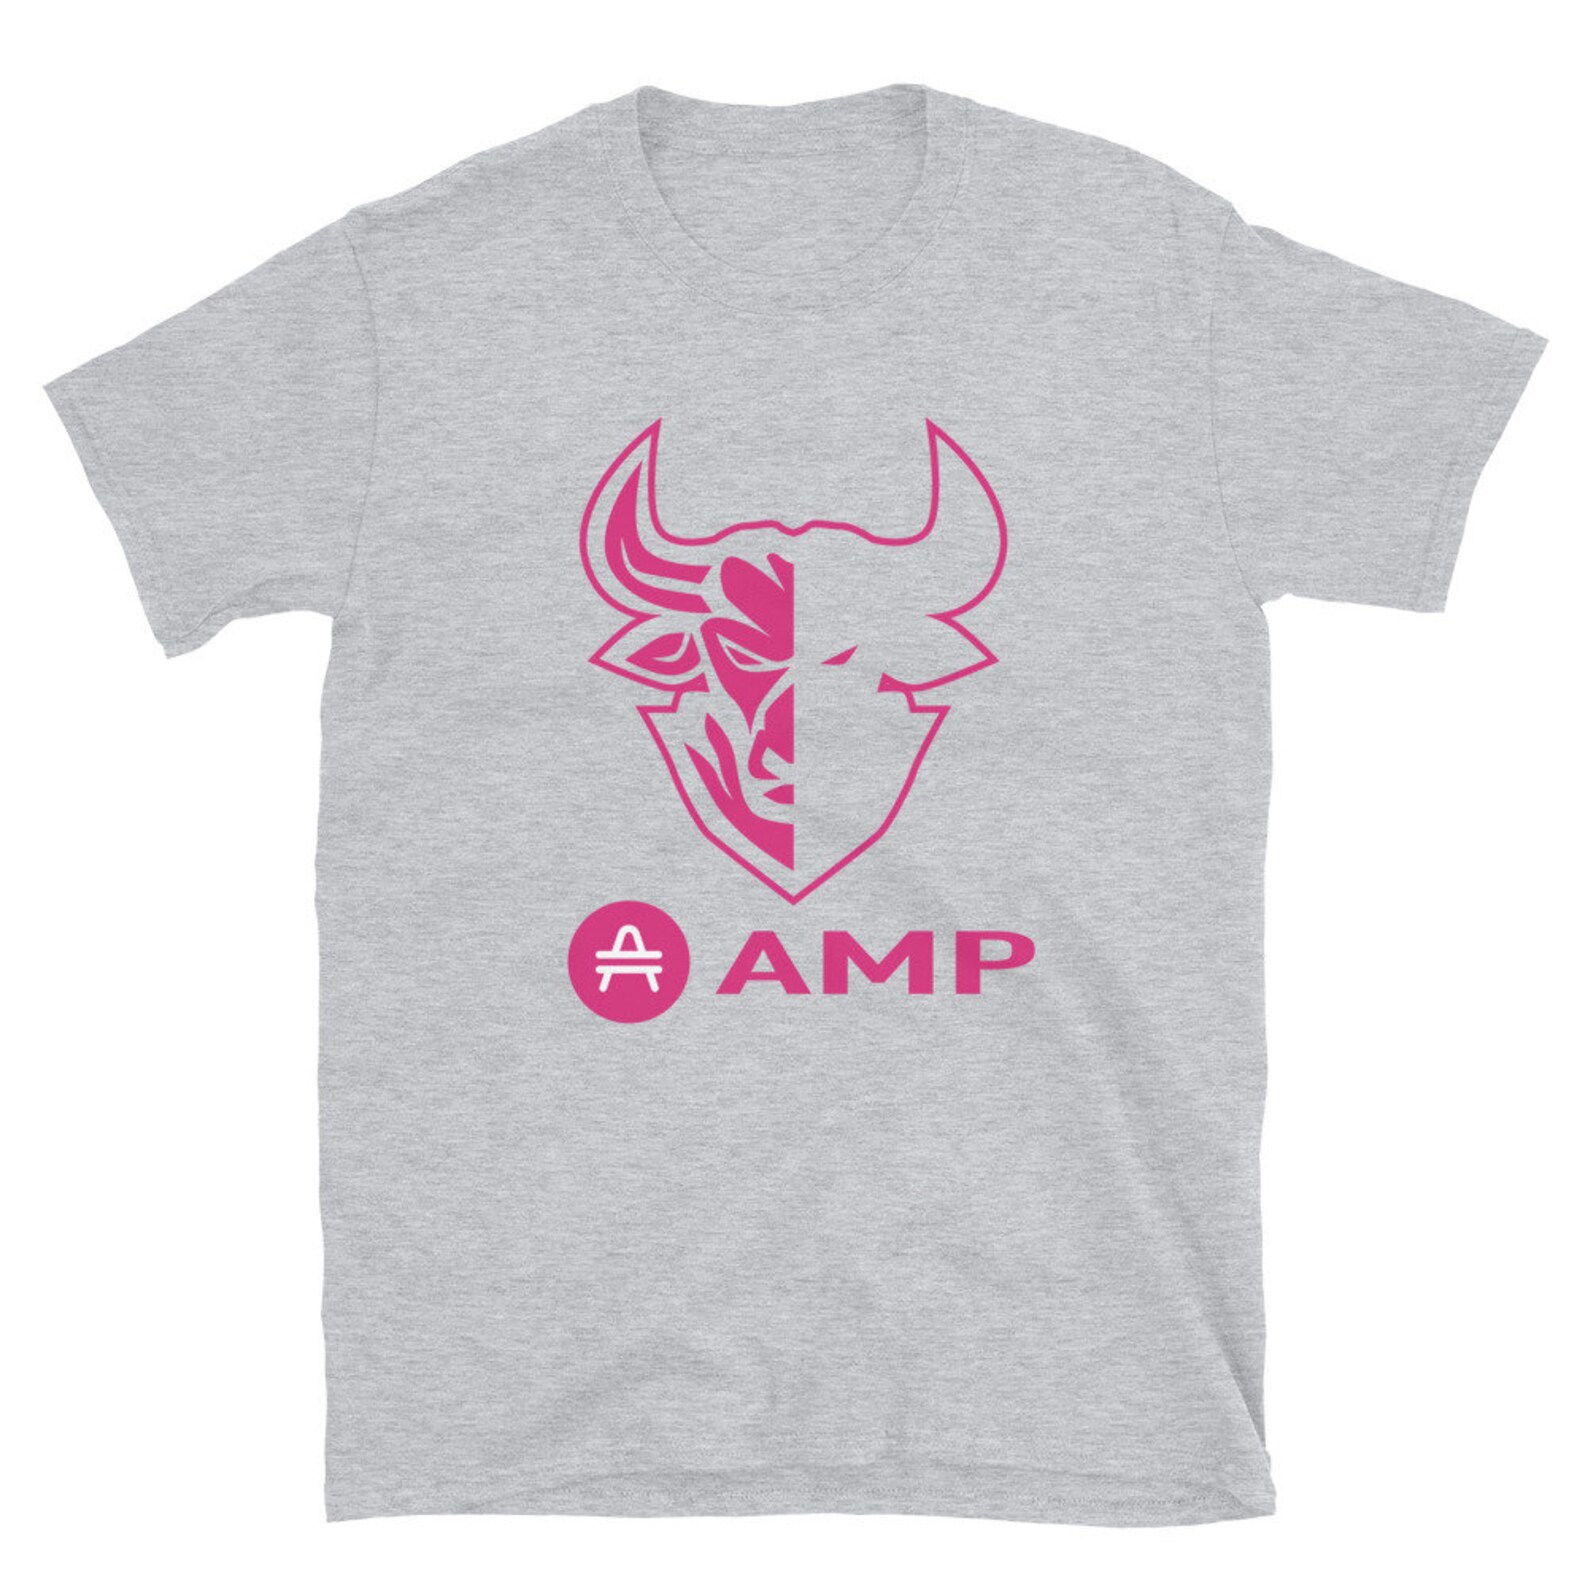 Amp Crypto Cryptocurrency Amp coin token Short-Sleeve ...